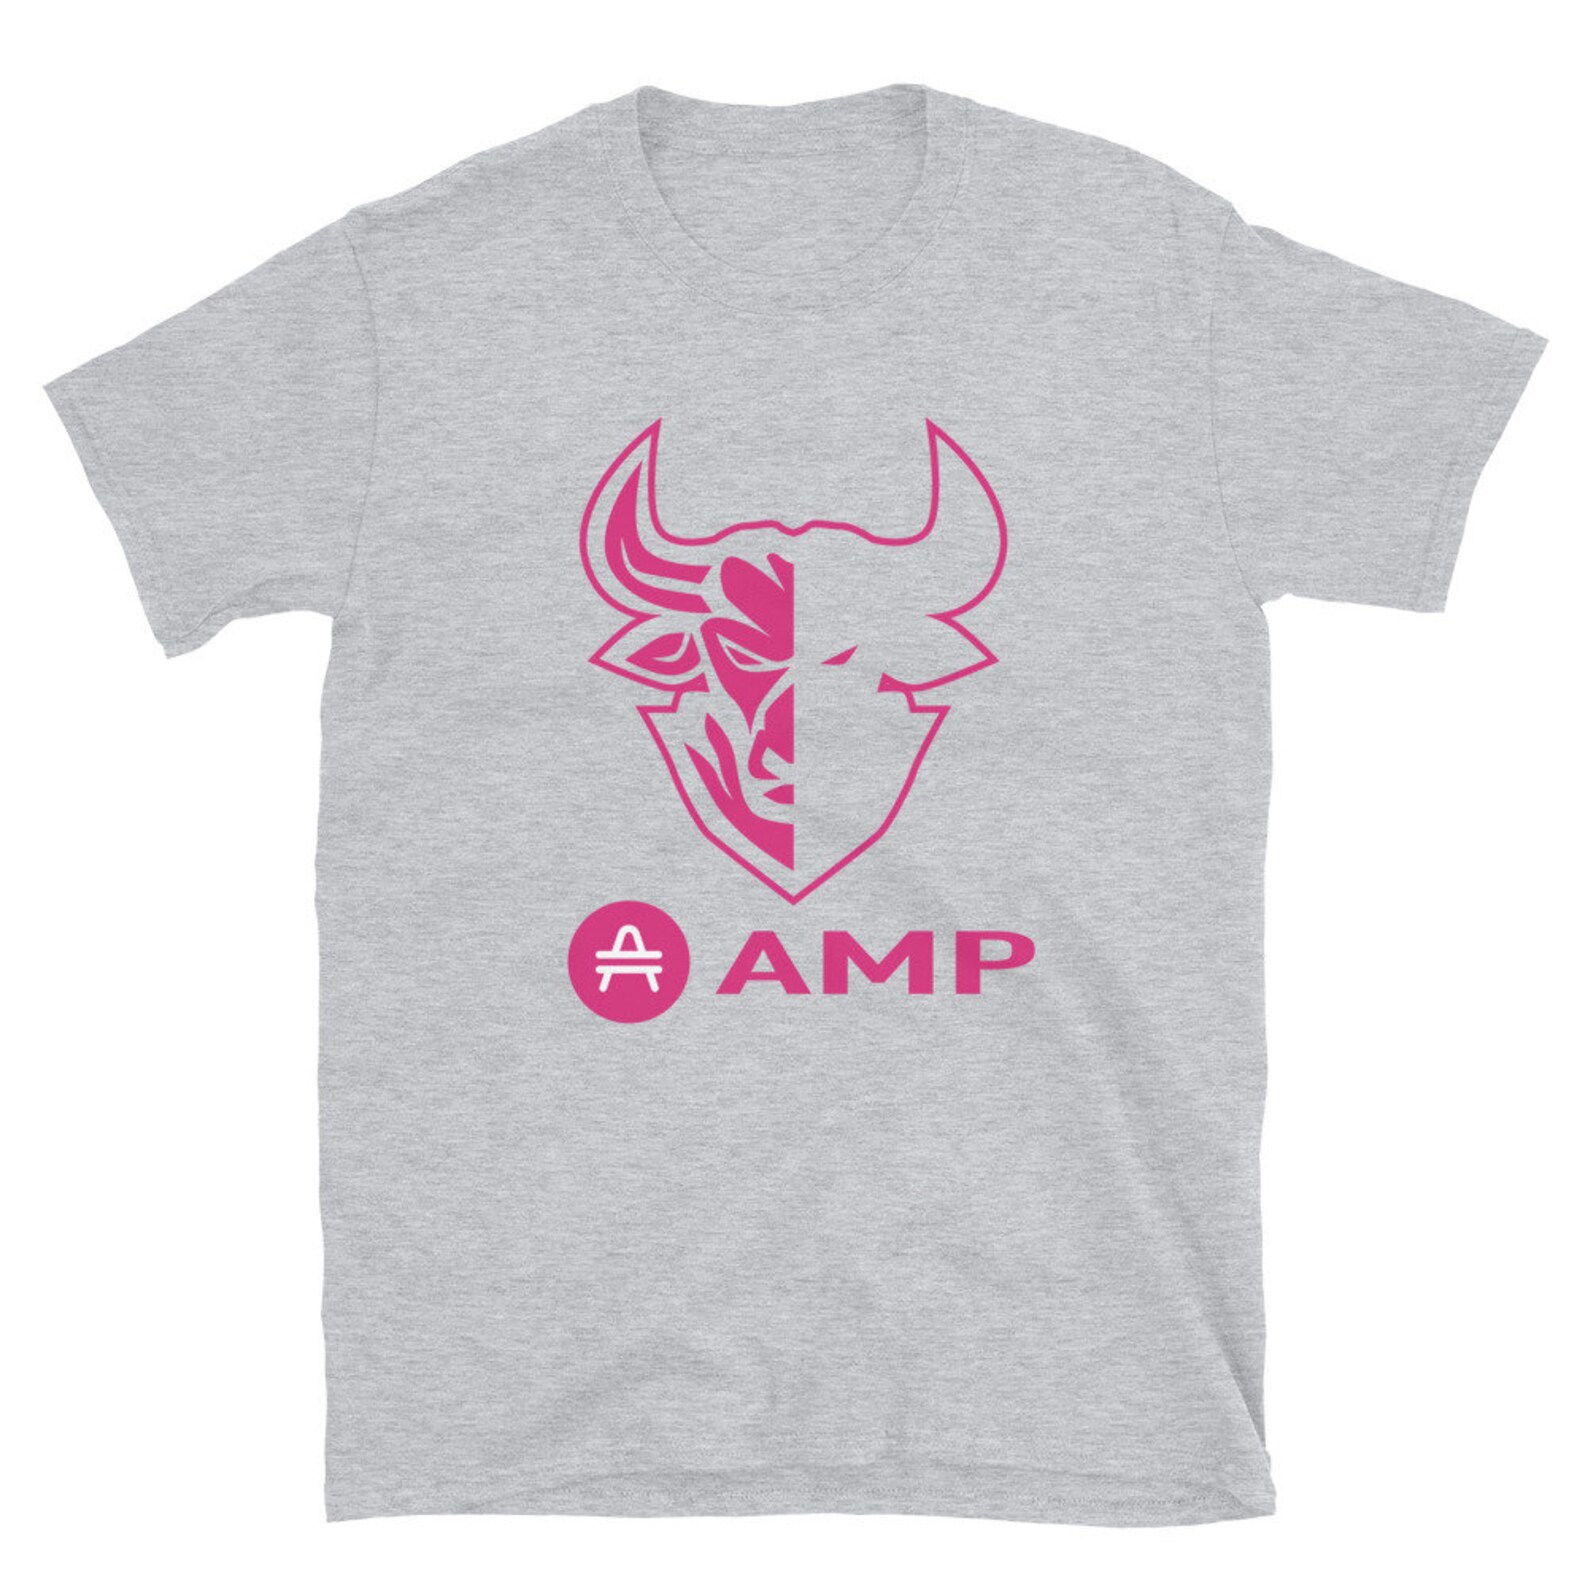 Amp Crypto Cryptocurrency Amp coin token Short-Sleeve ...